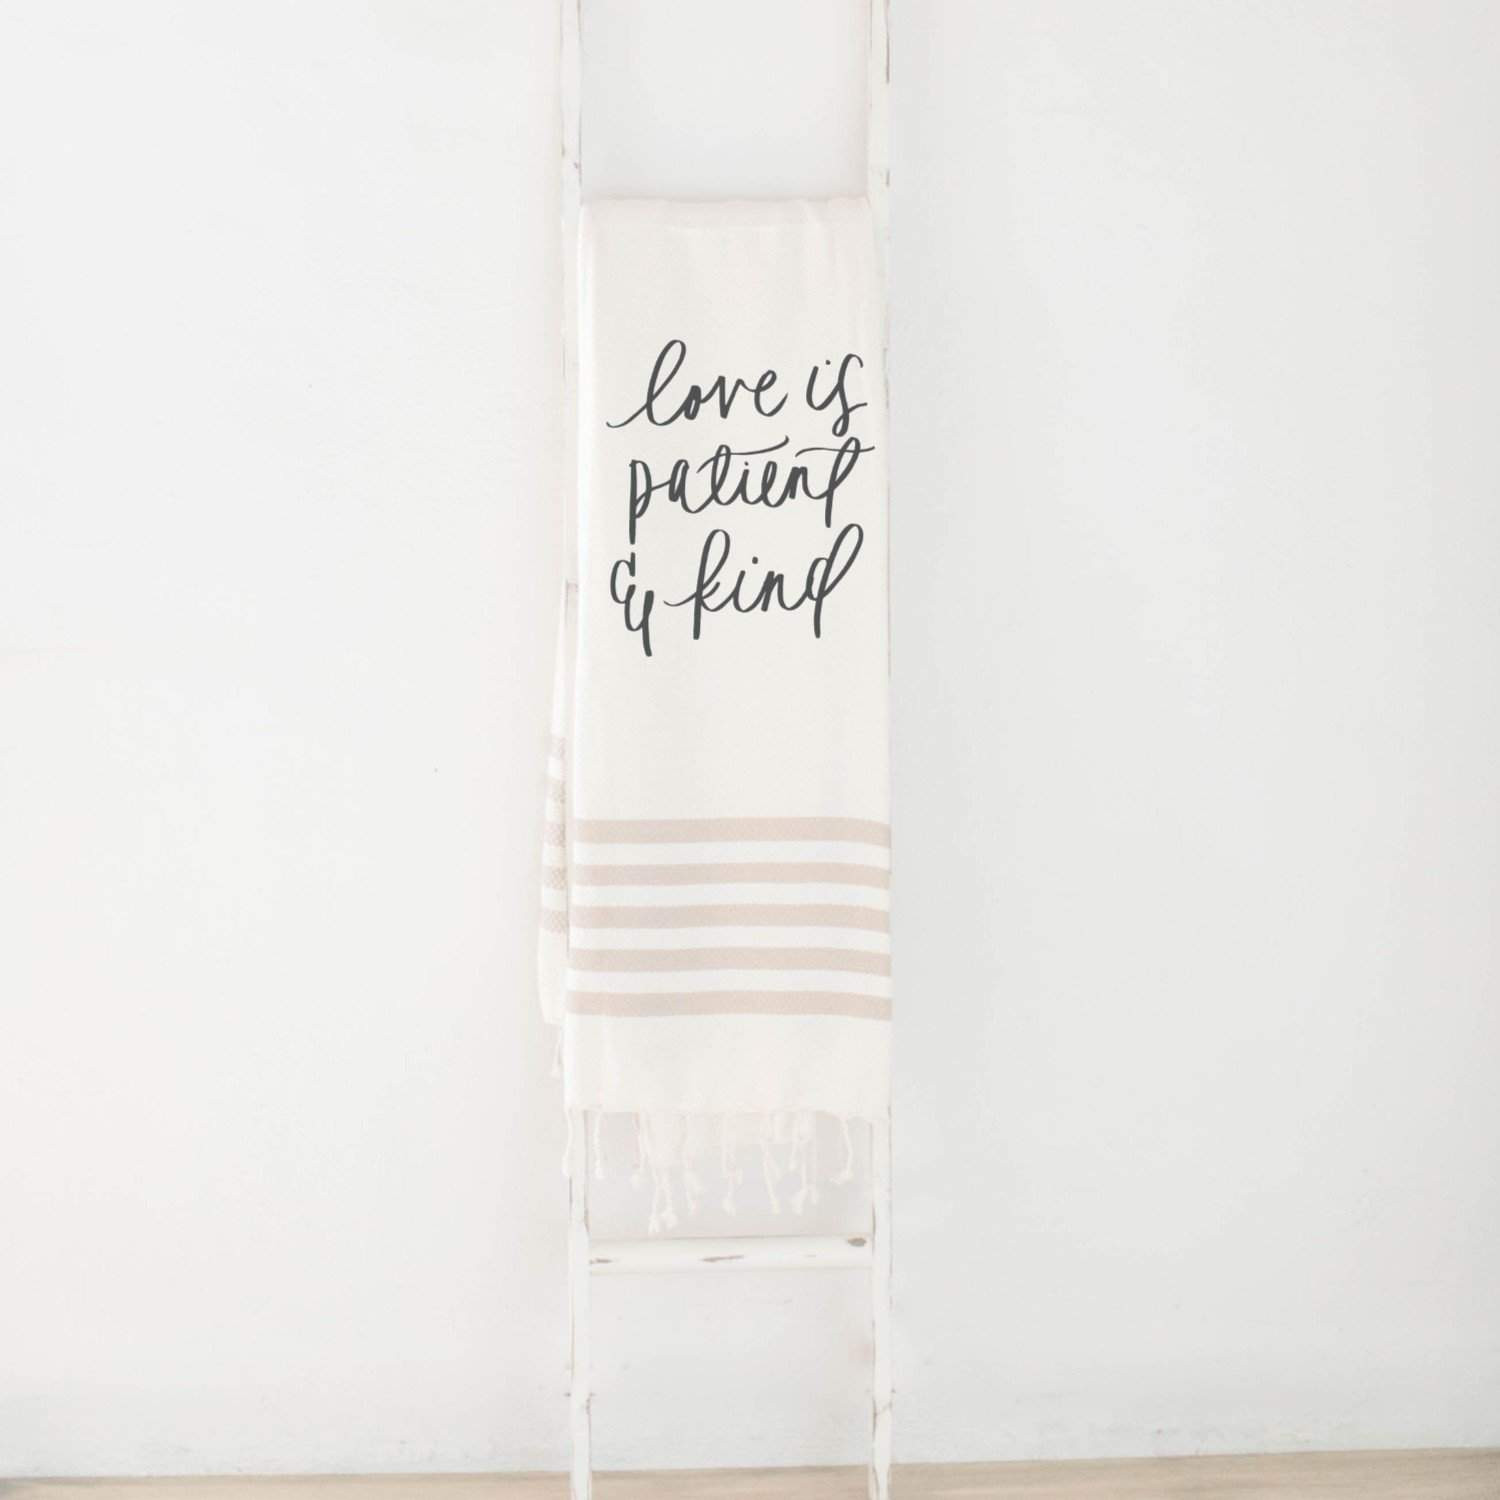 Religious Wedding Gifts
 Top 10 Best Christian Wedding Gifts